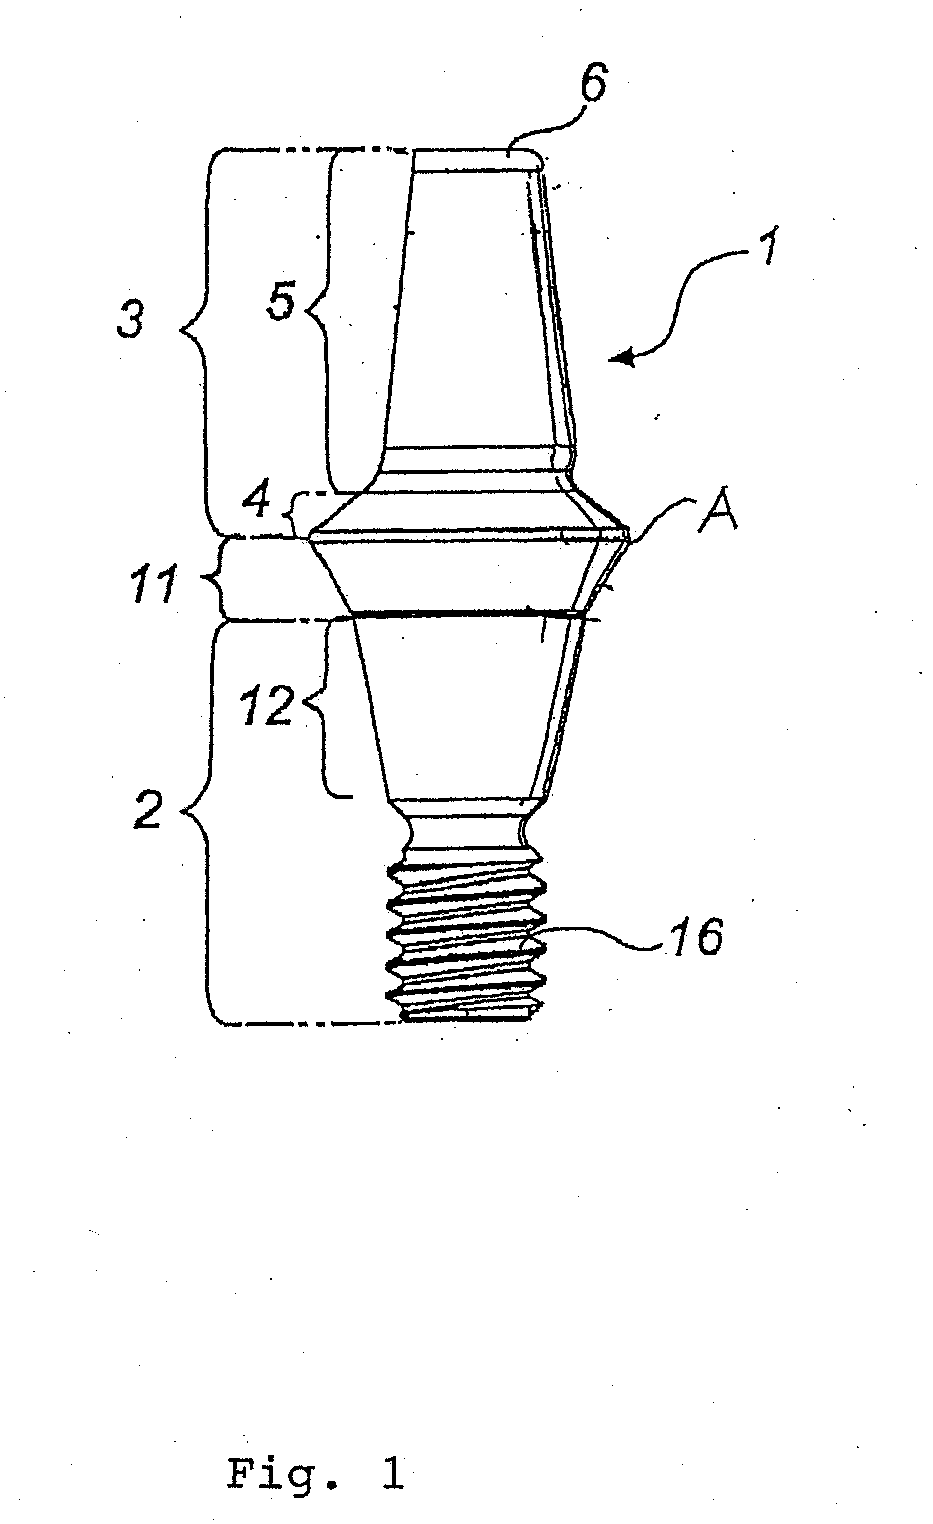 Abutment with a Hydroxylated Surface